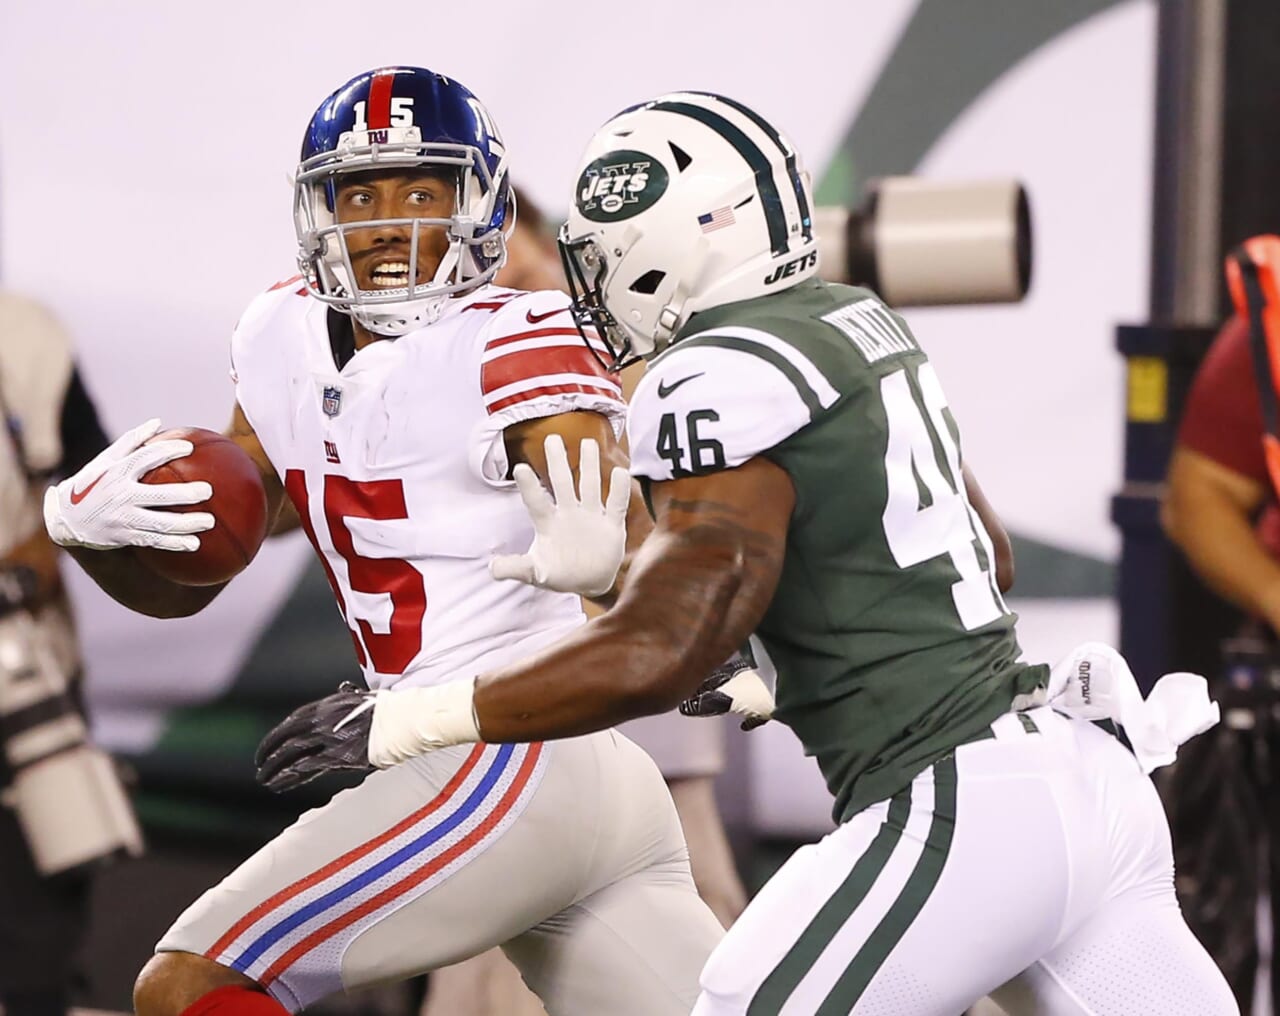 Can New York Giants’ Hunter Sharp Steal The Fourth WR Spot?